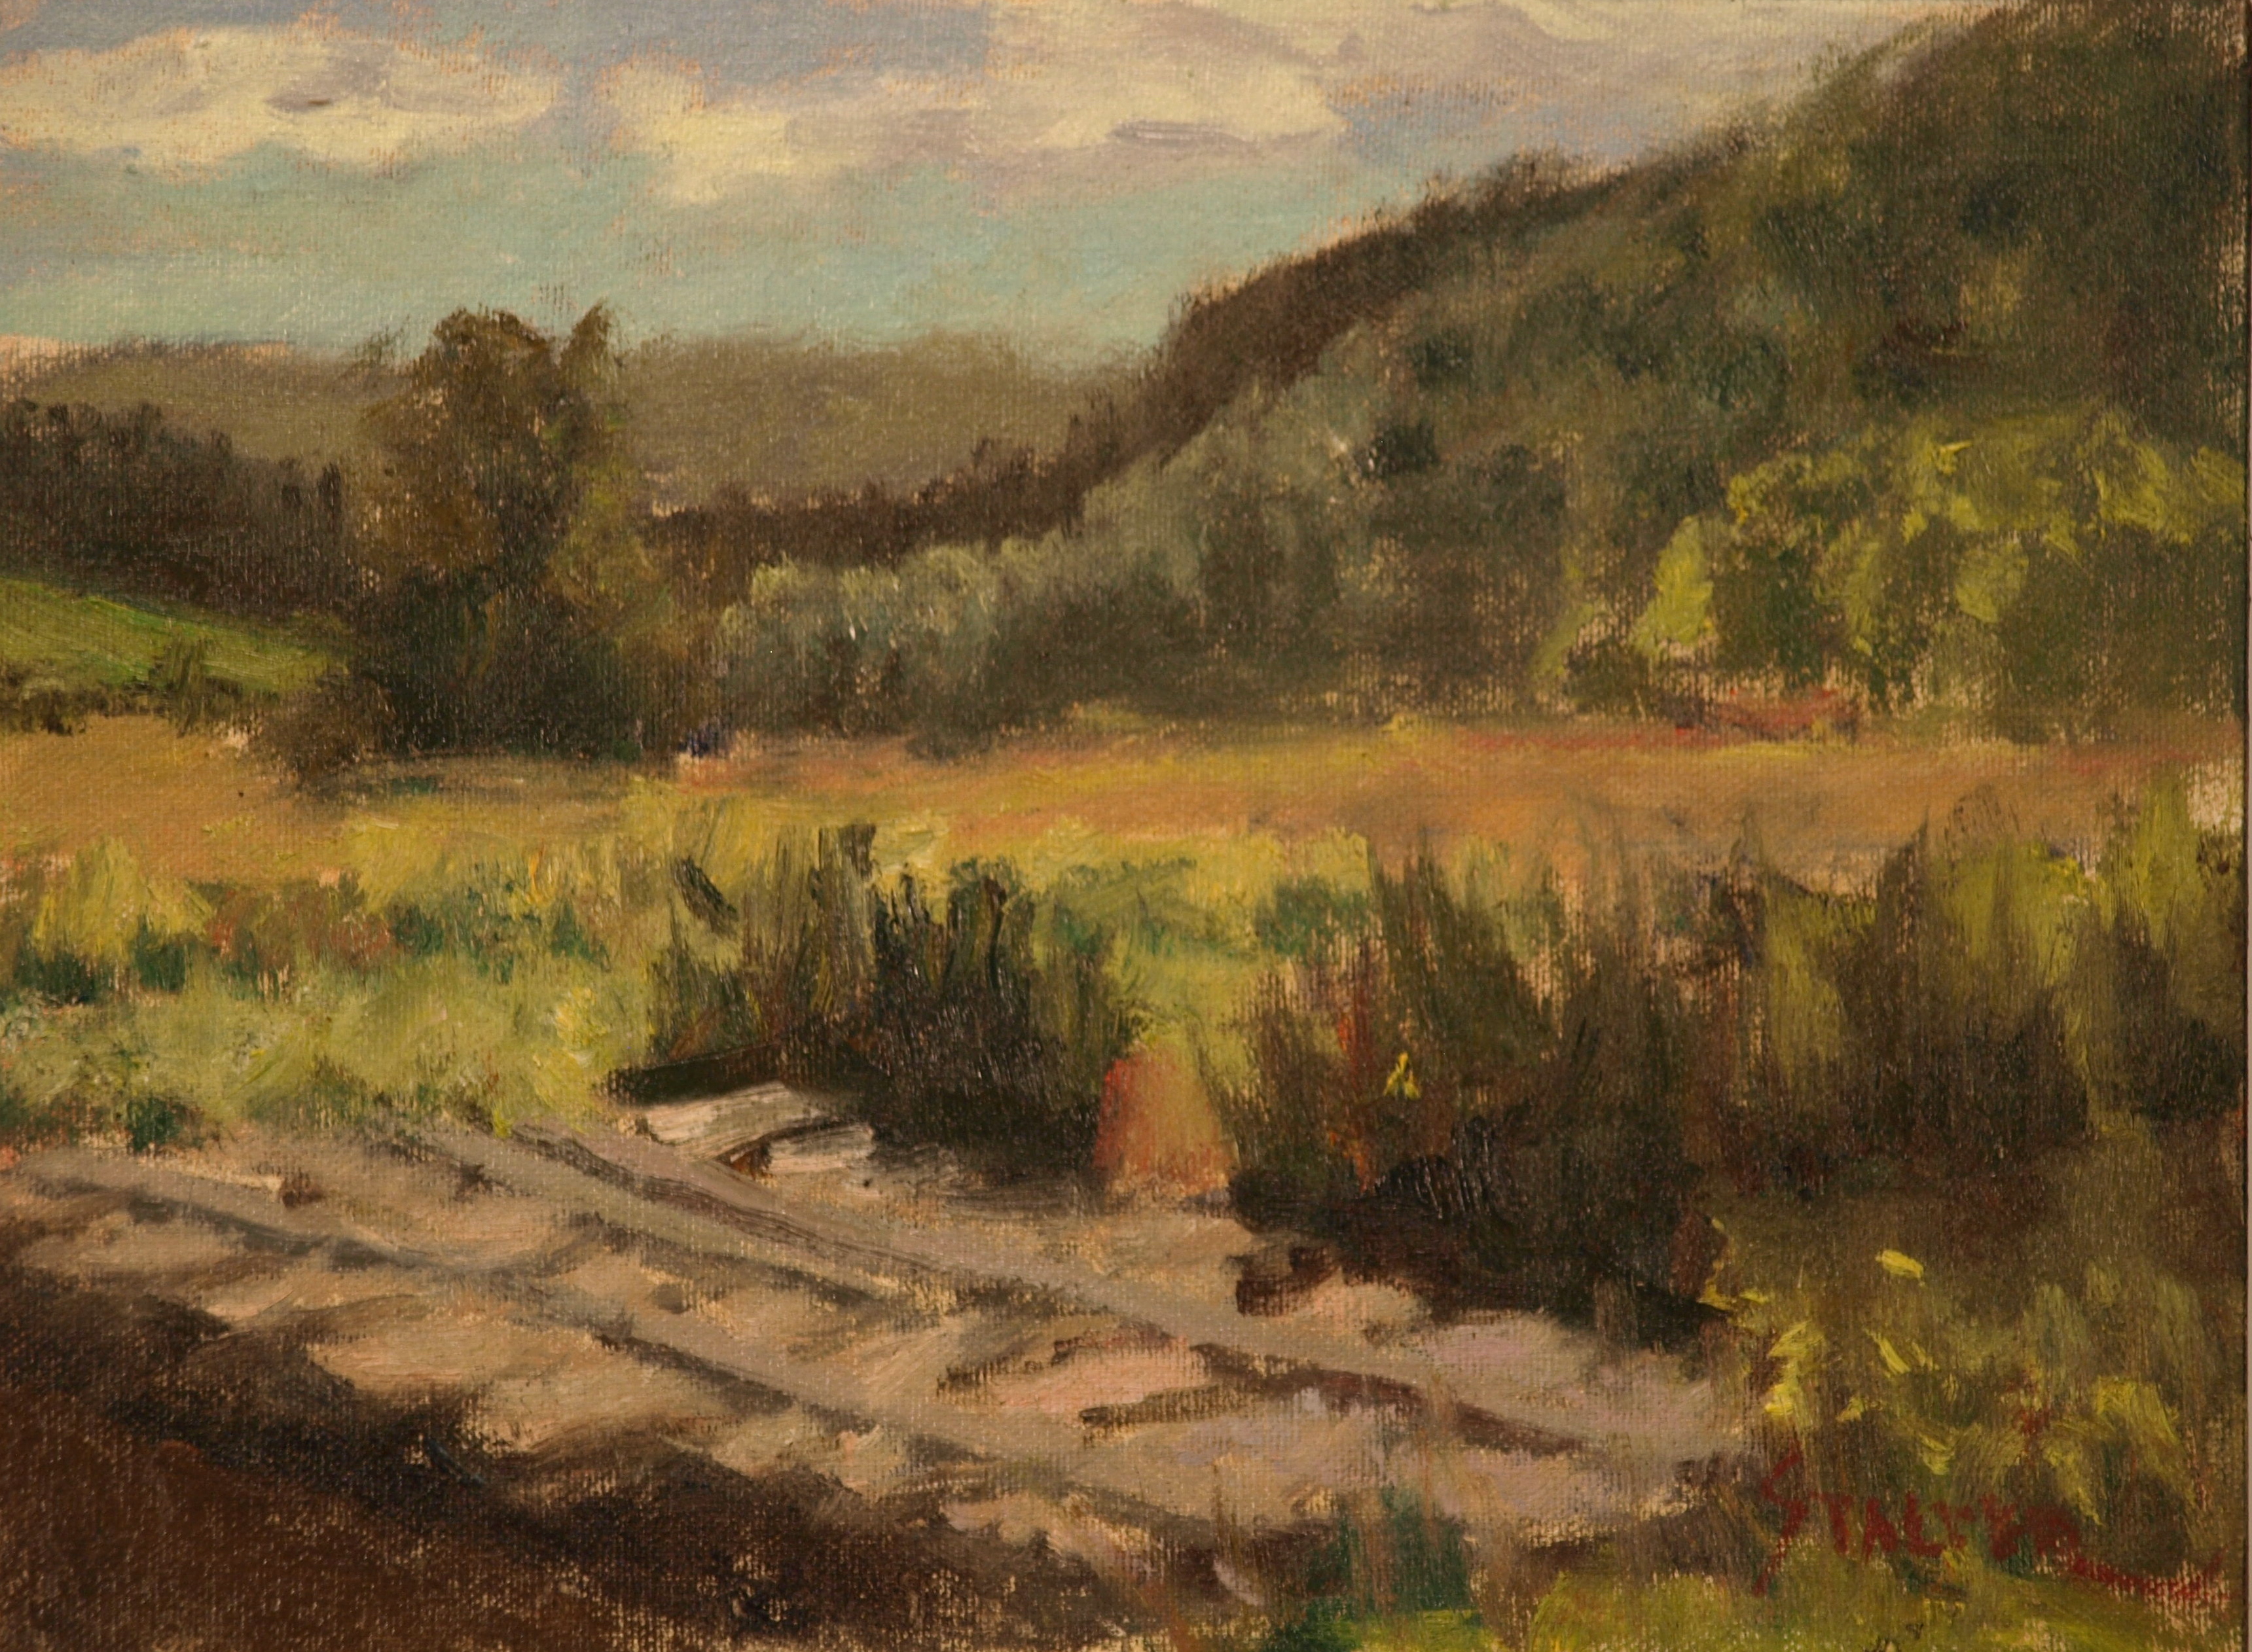 Pasture Bridge, Oil on Canvas on Panel, 9 x 12 Inches, by Richard Stalter, $225